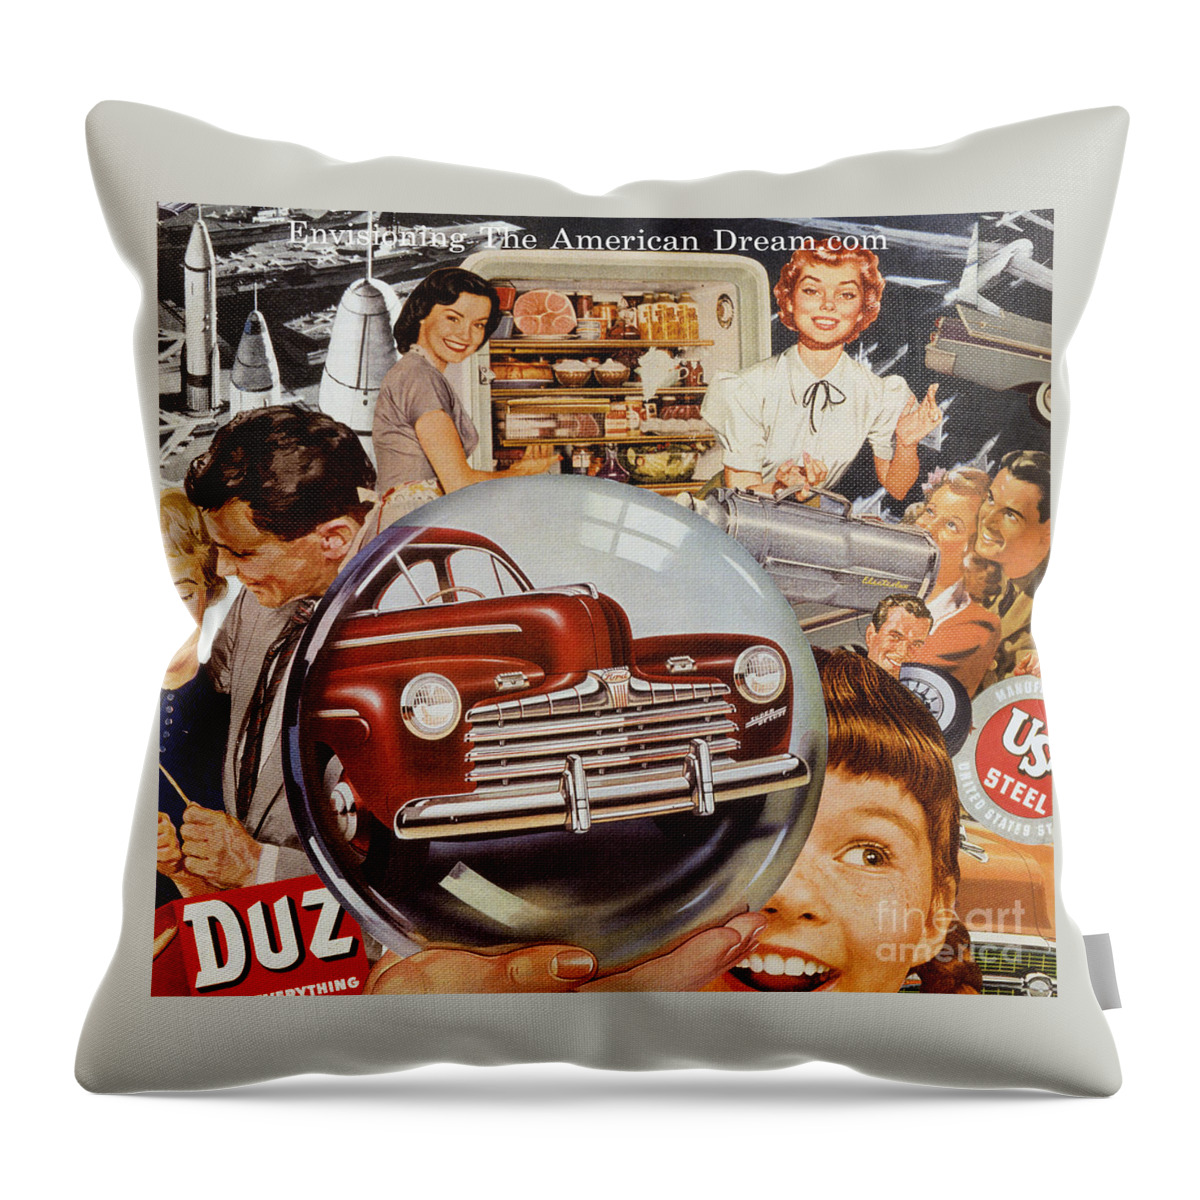 Collage Throw Pillow featuring the mixed media Envisioning The American Dream.com by Sally Edelstein